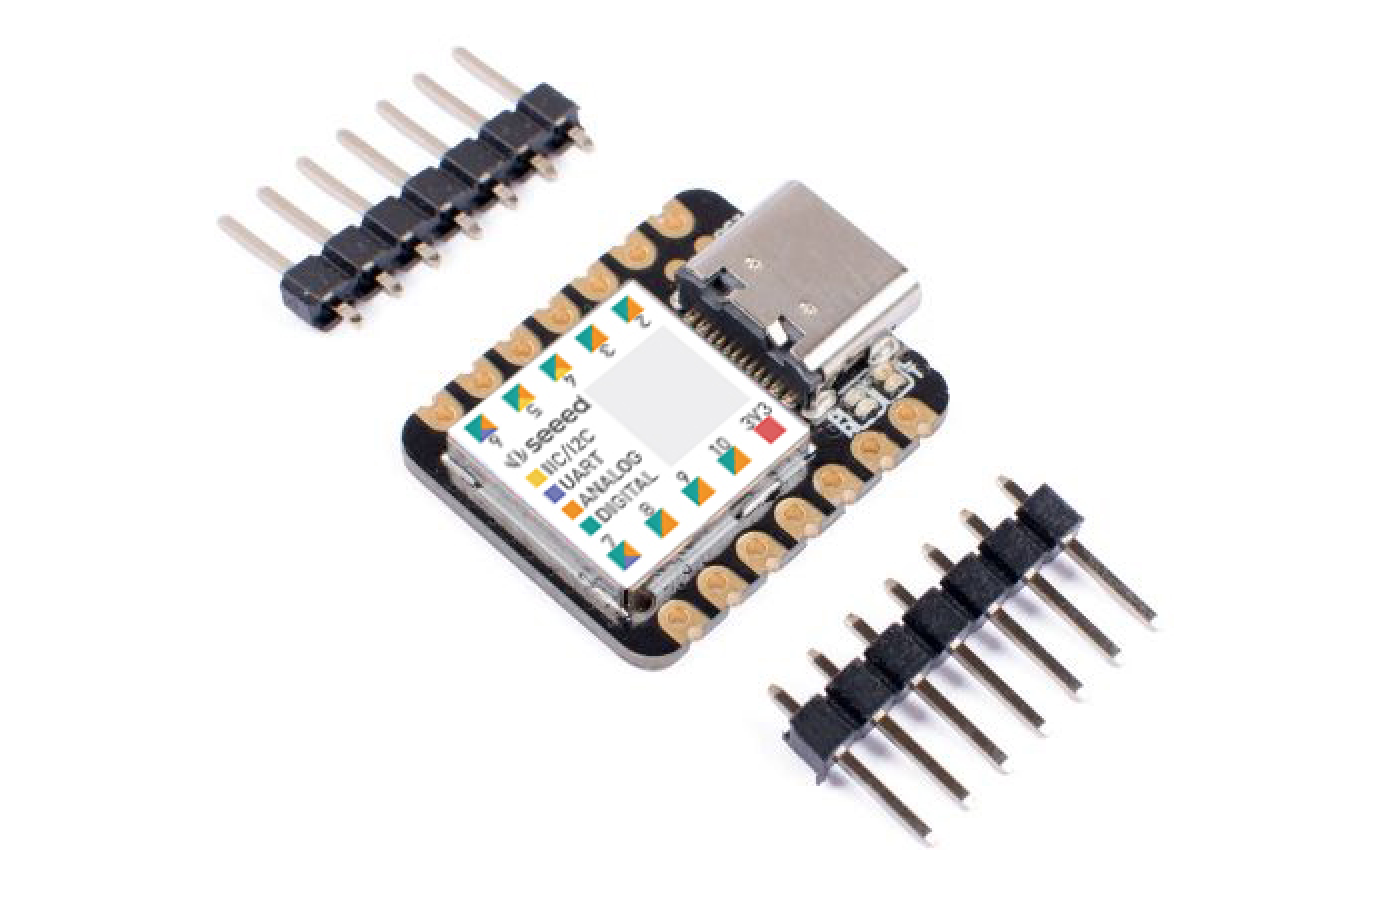 Kuinayouyi Seeeduino XIAO The Smallest Microcontroller Based on SAMD21,with Rich Interfaces for IDE Compatible 